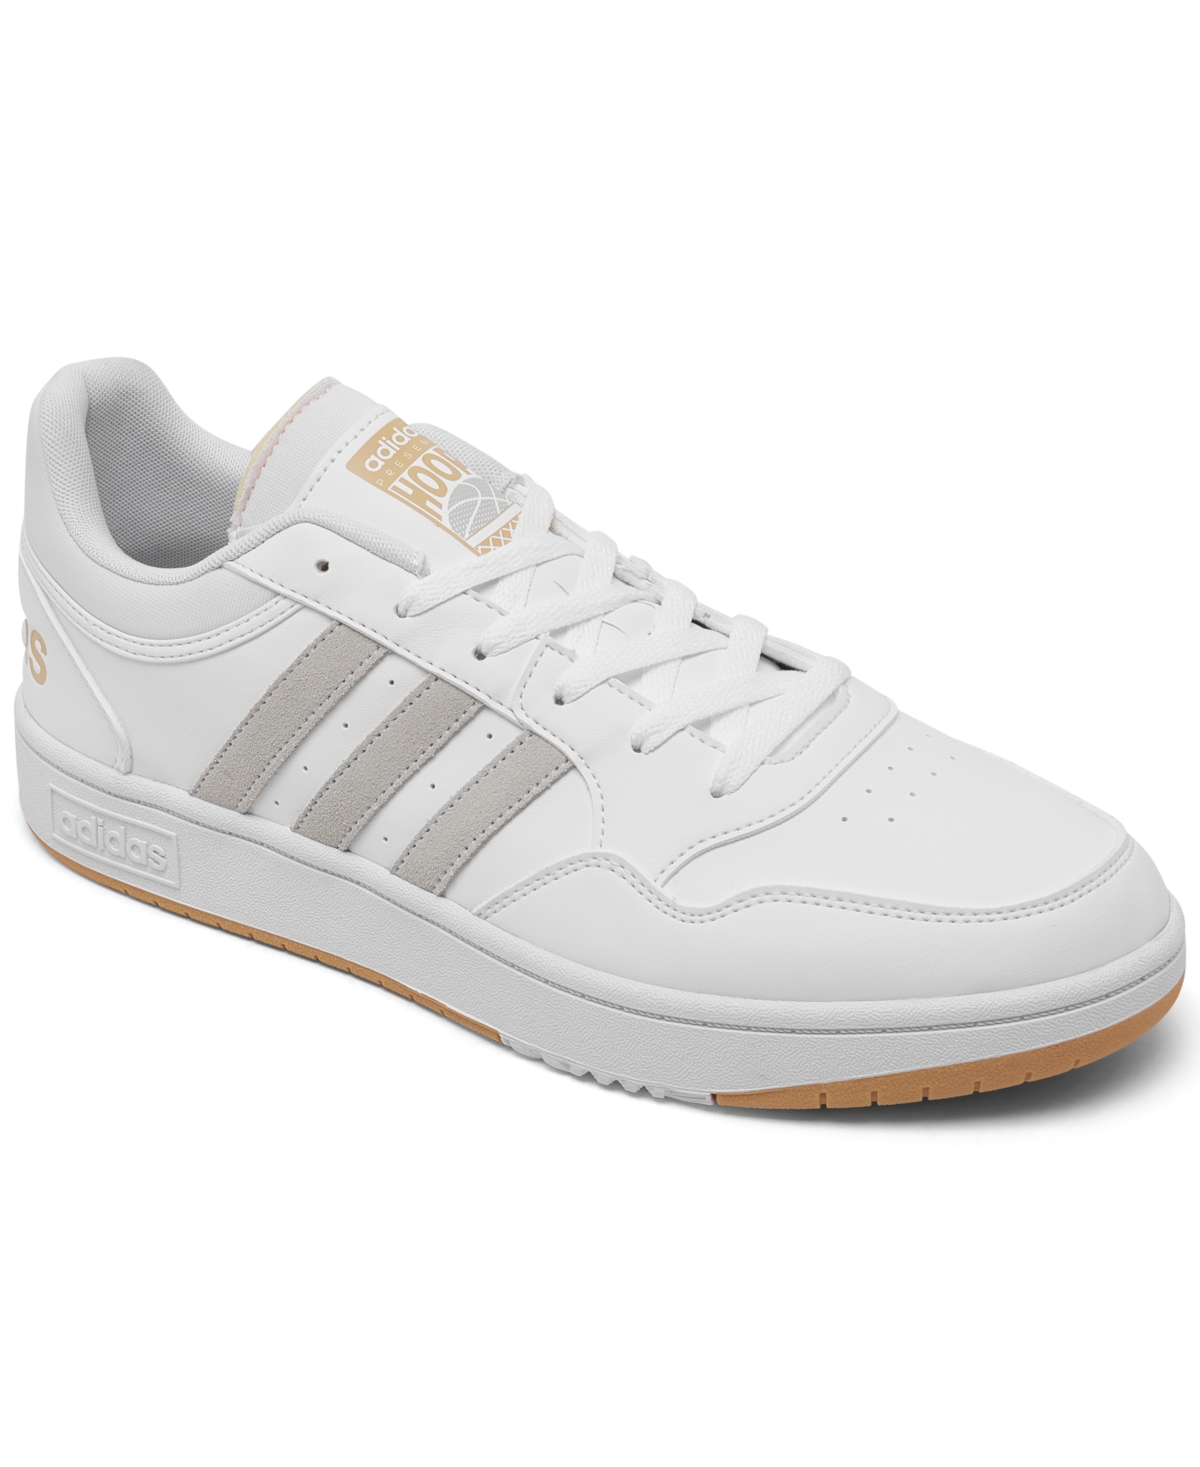 Adidas Originals Men's Hoops 3.0 Low Classic Vintage-like Casual Sneakers From Finish Line In Footwear White